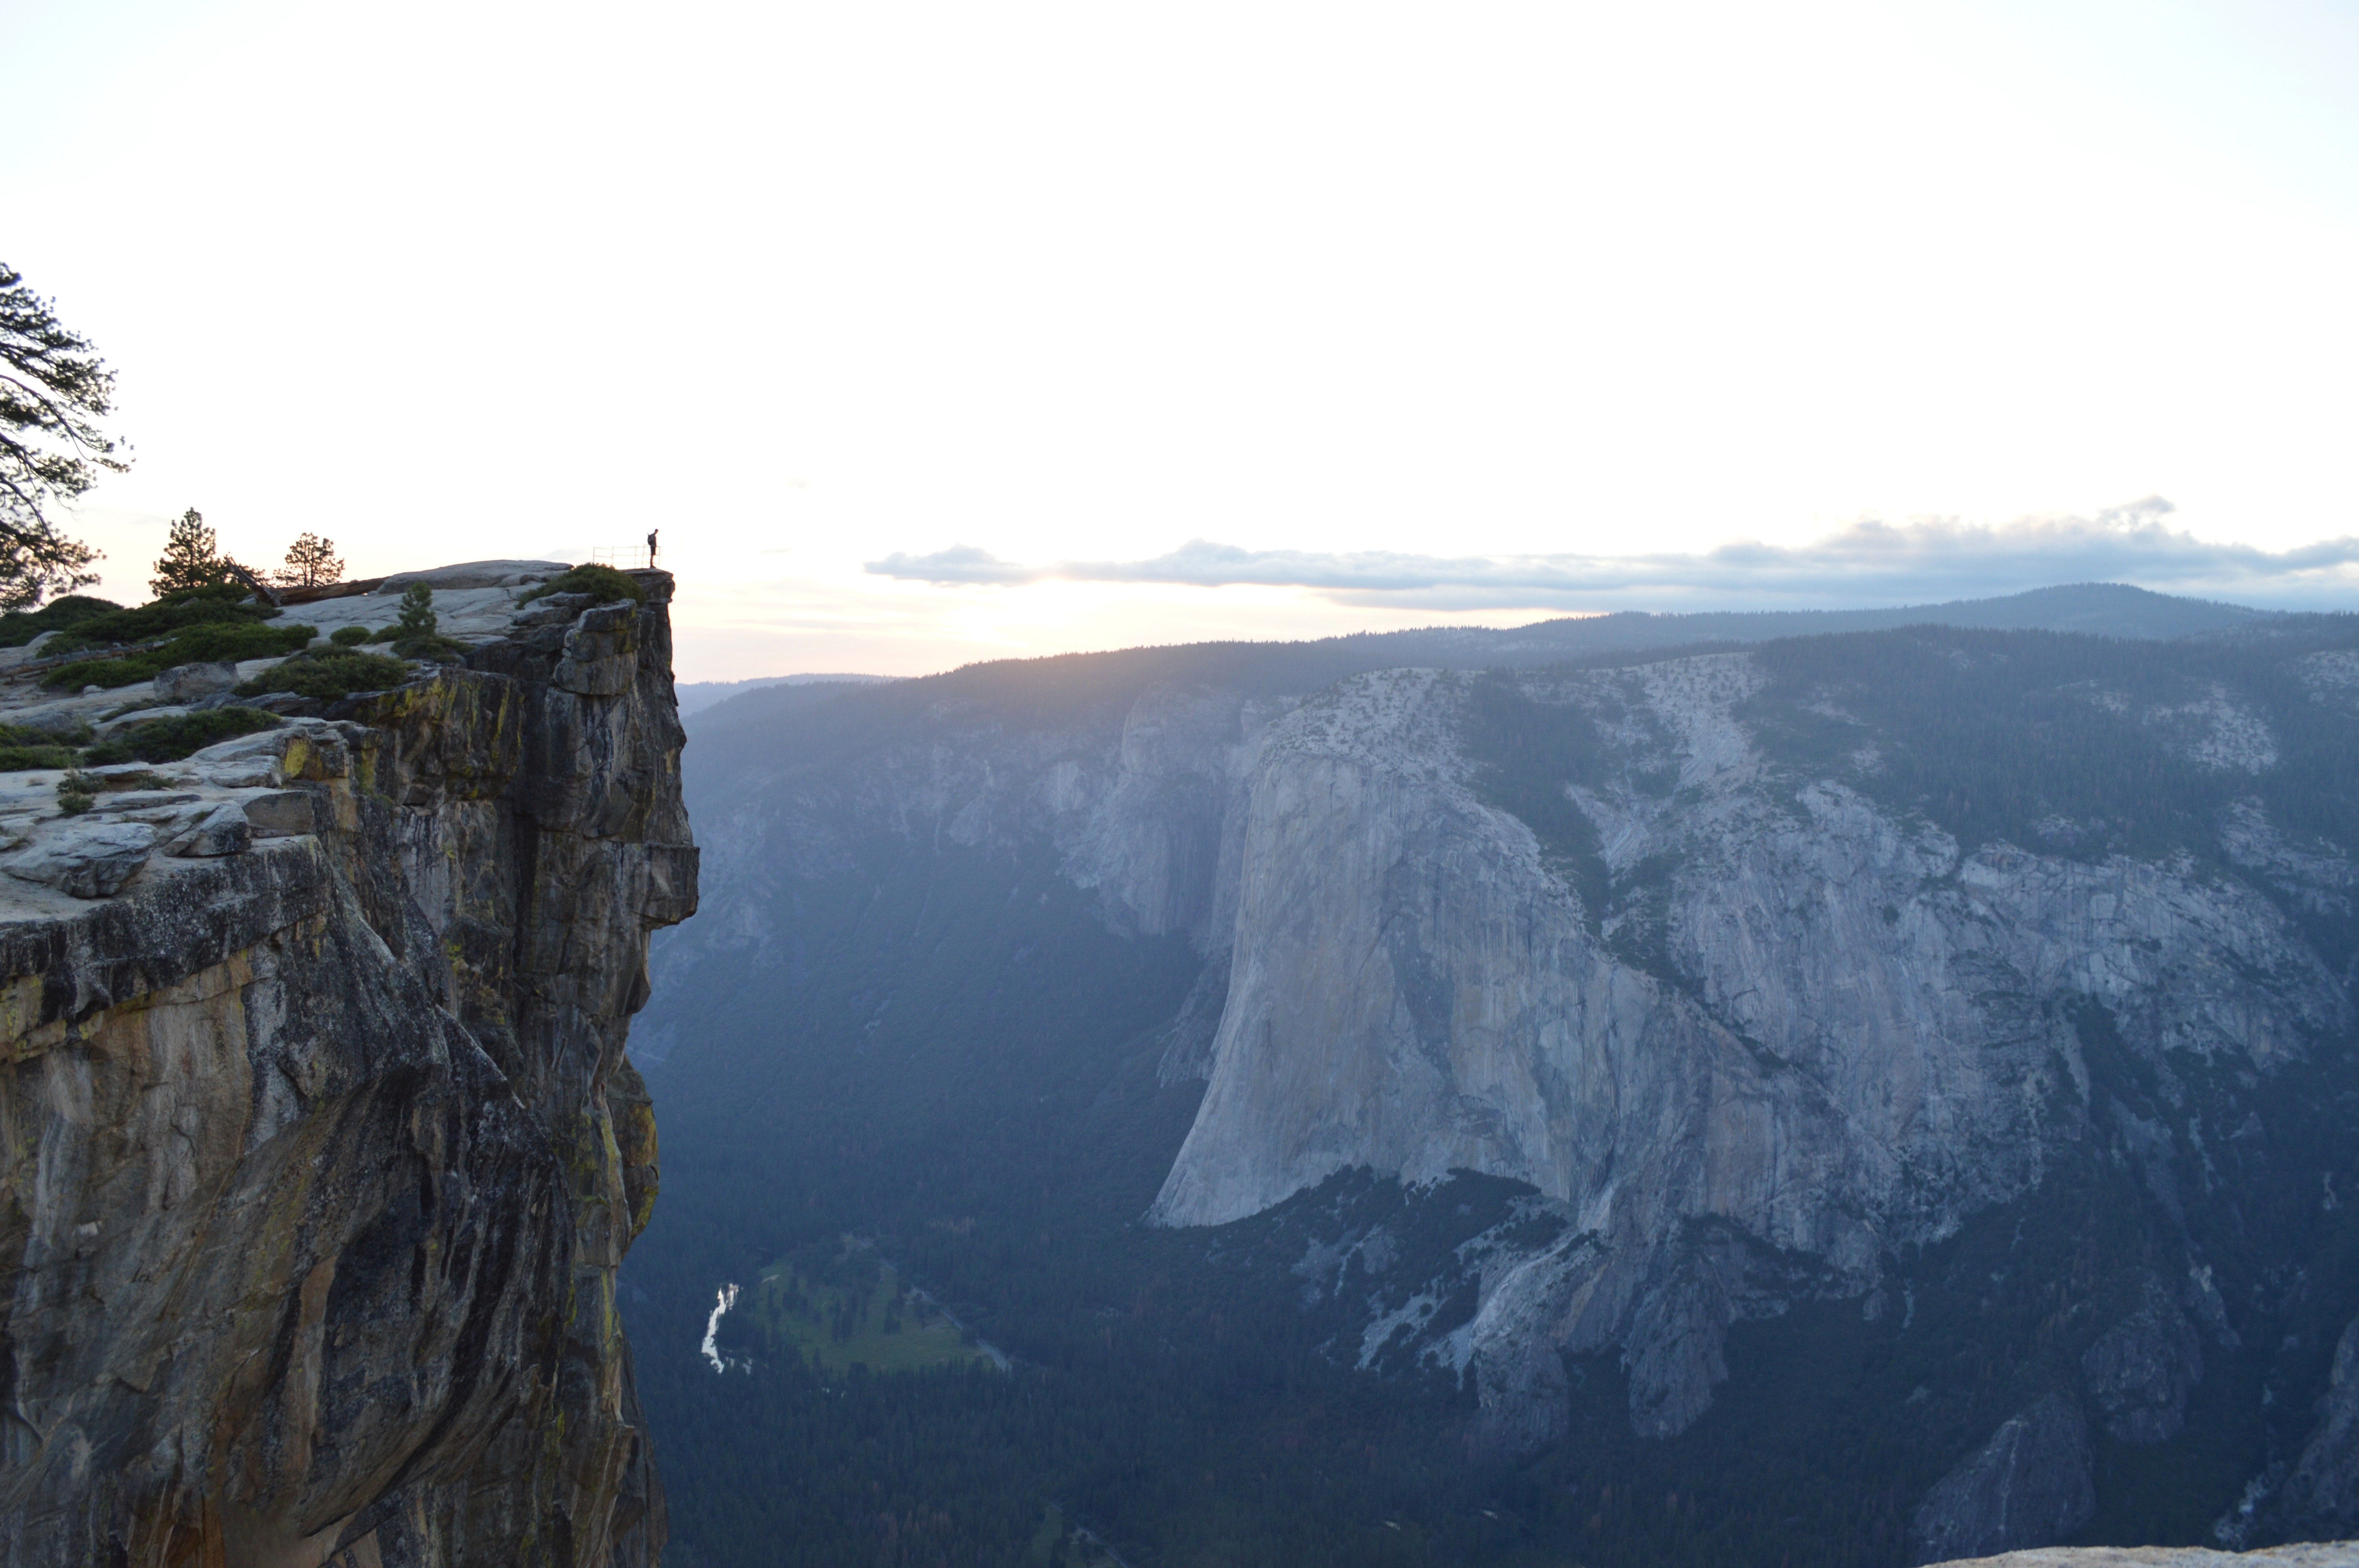 Image: wide view of a person standing on a cliff face looking out at a valley surrounded by mountains